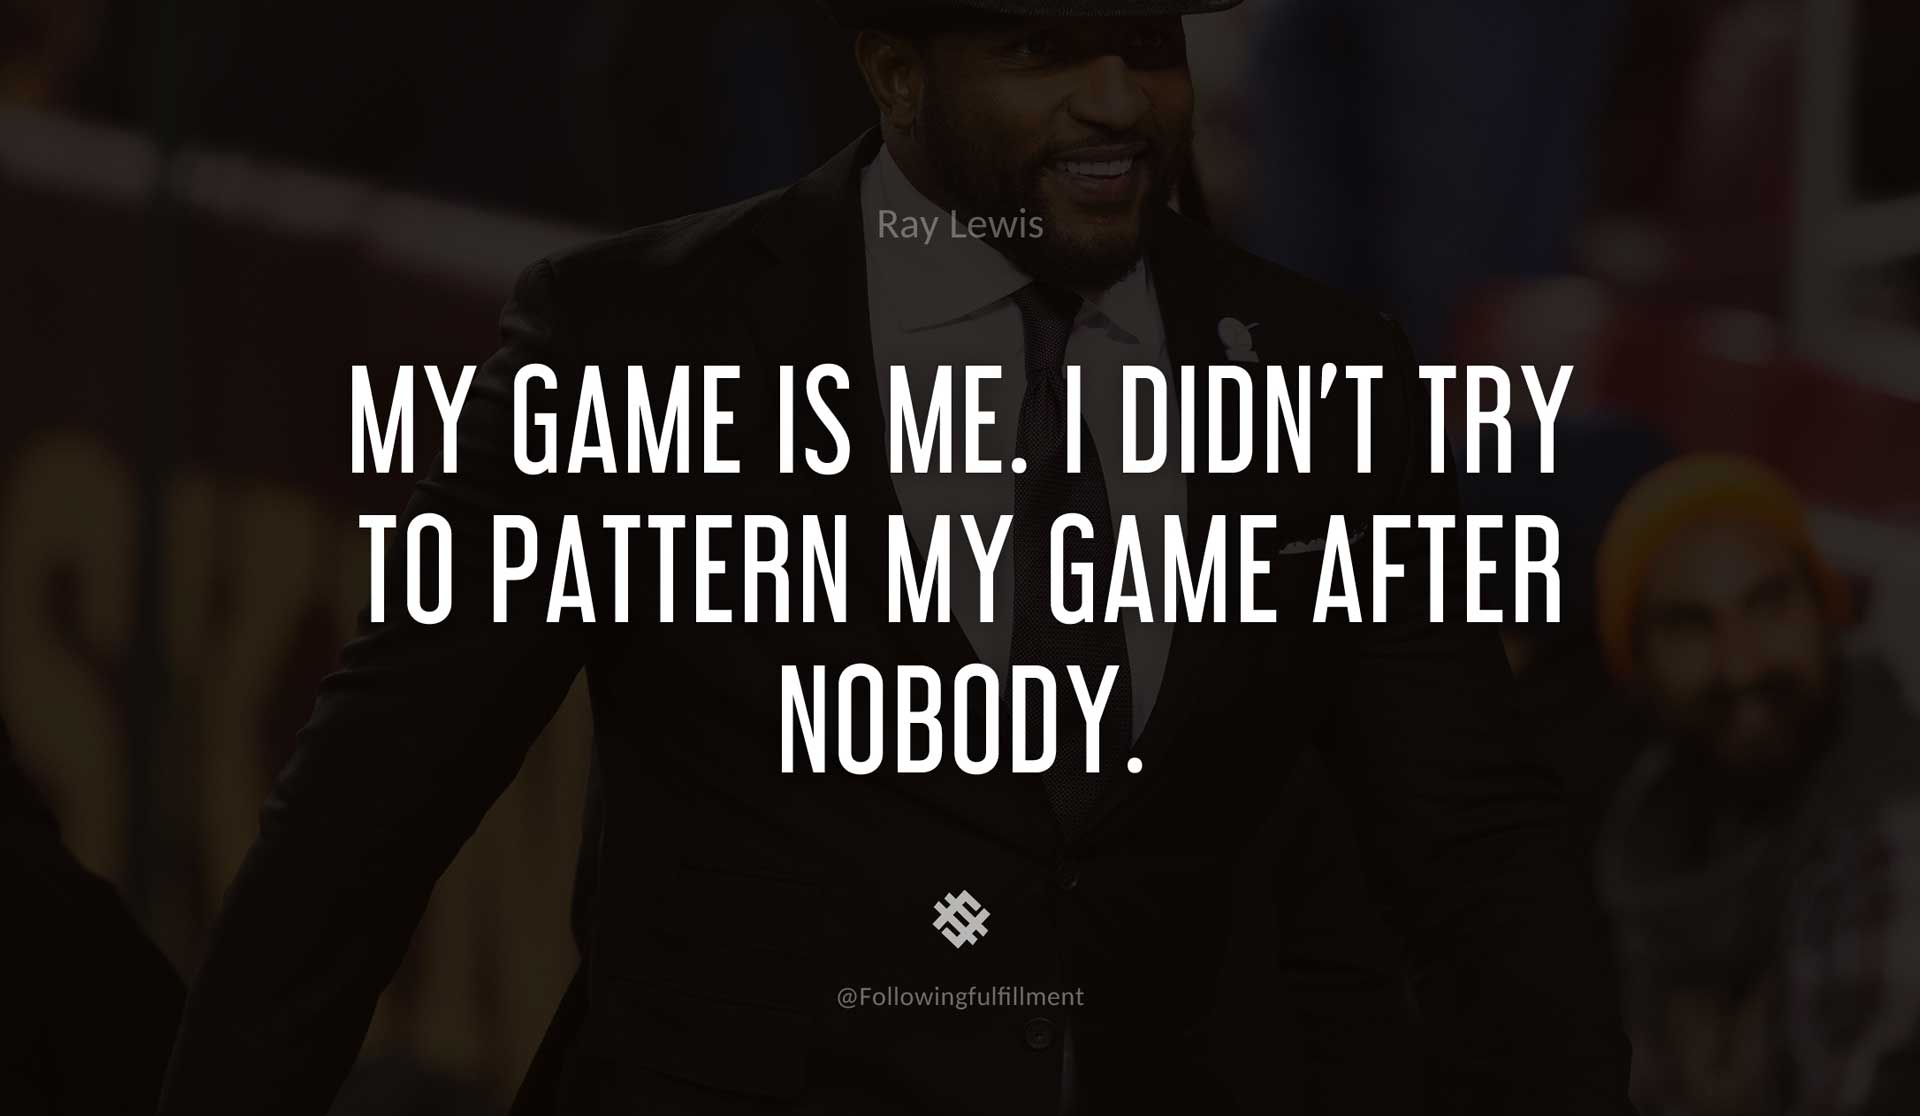 My-game-is-me.-I-didn't-try-to-pattern-my-game-after-nobody.-RAY-LEWIS-Quote.jpg